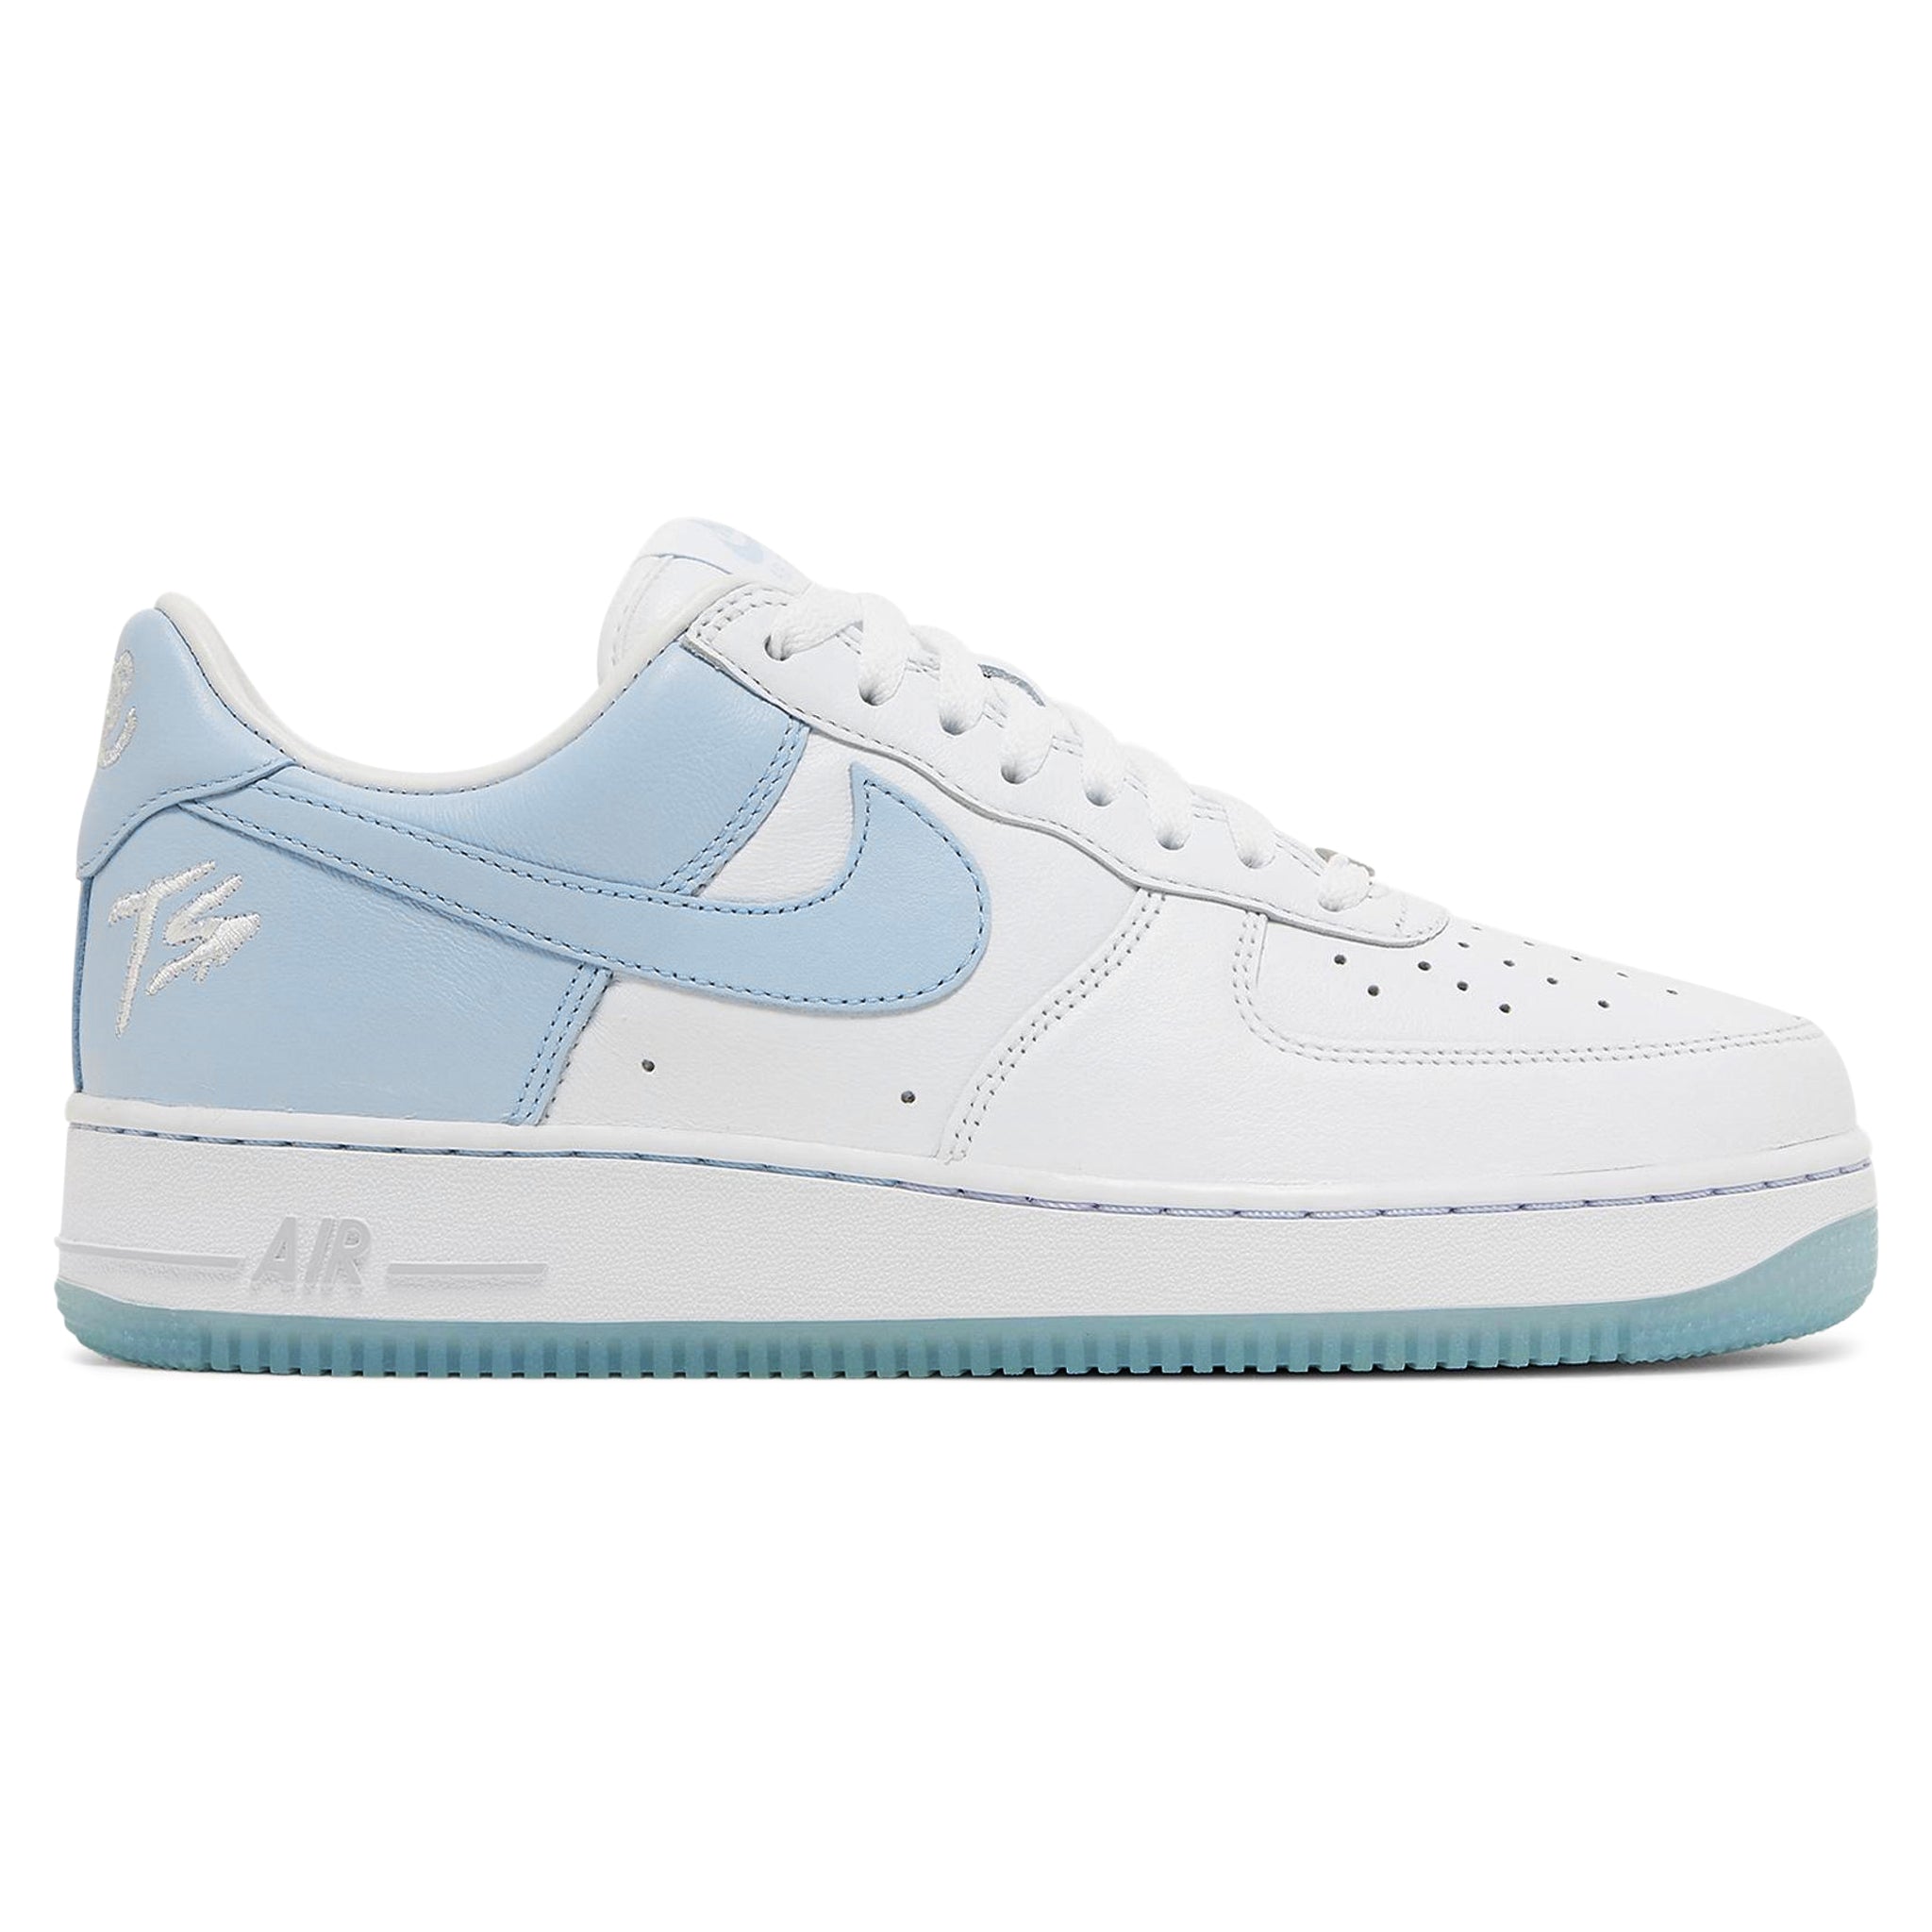 Side view of Terror Squad x Nike Air Force 1 Low Loyalty FJ5755-100